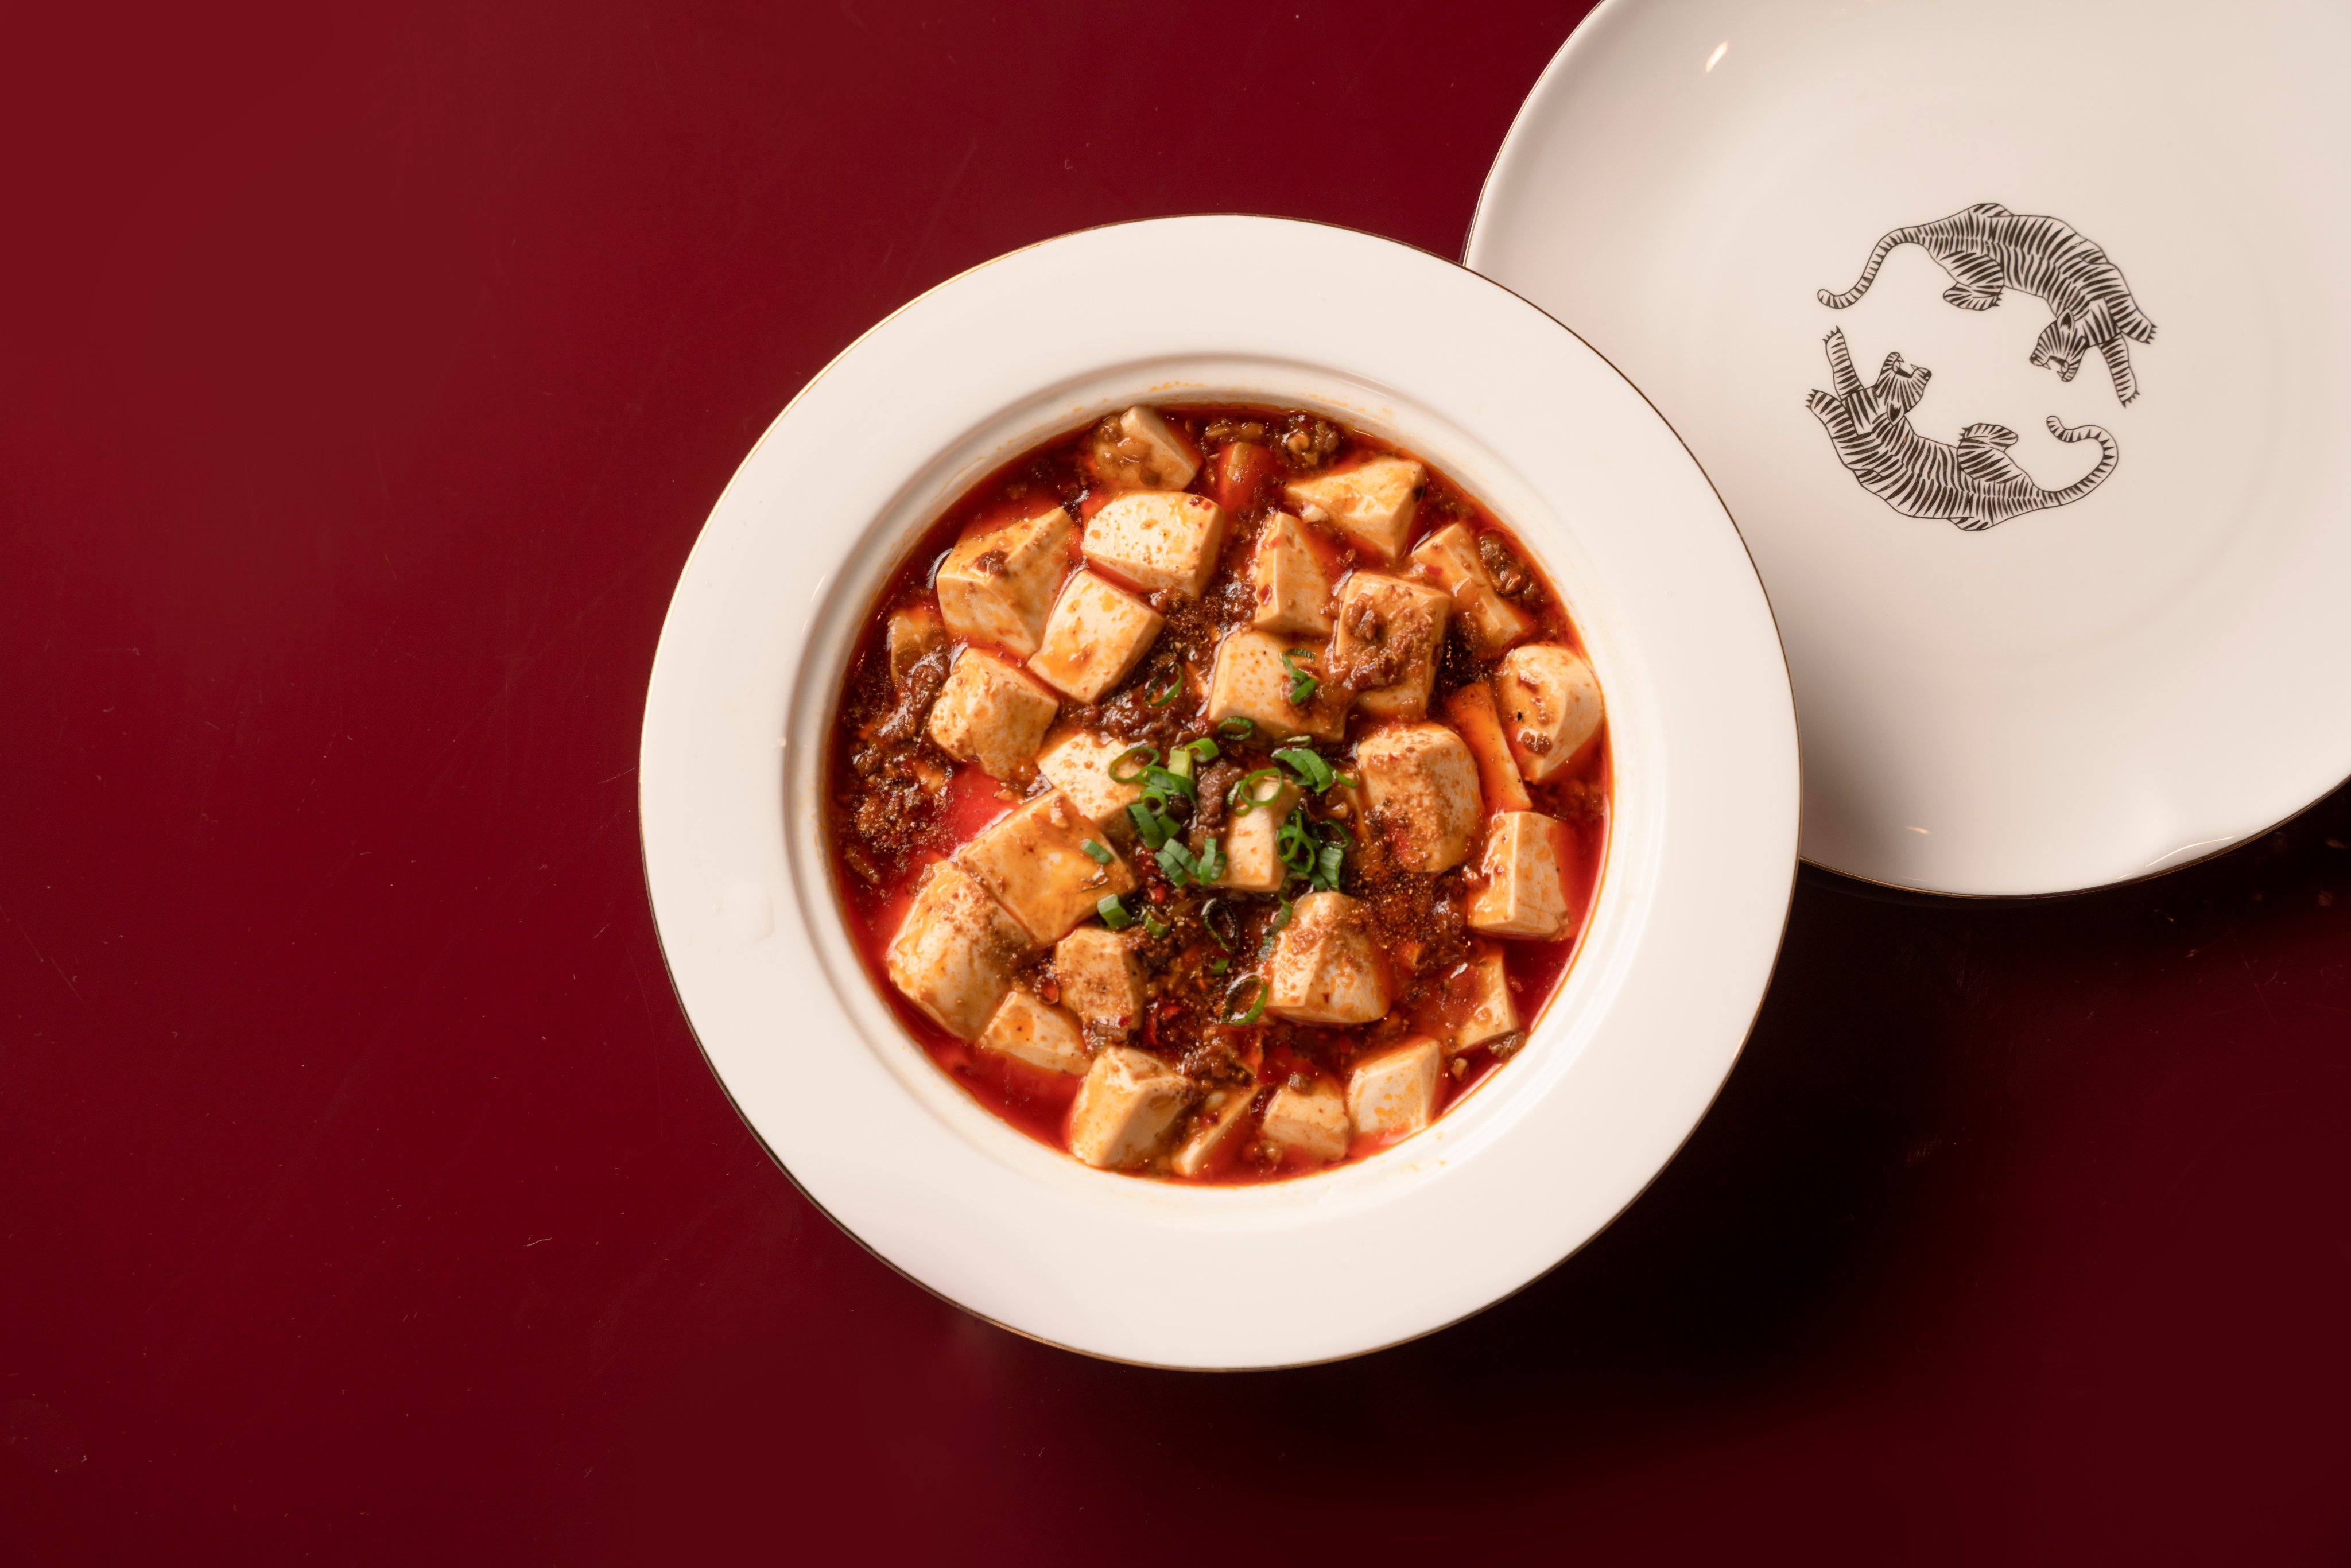 Mapo tofu features a delicate balance of spicy, numbing, salty, sweet and umami flavours.